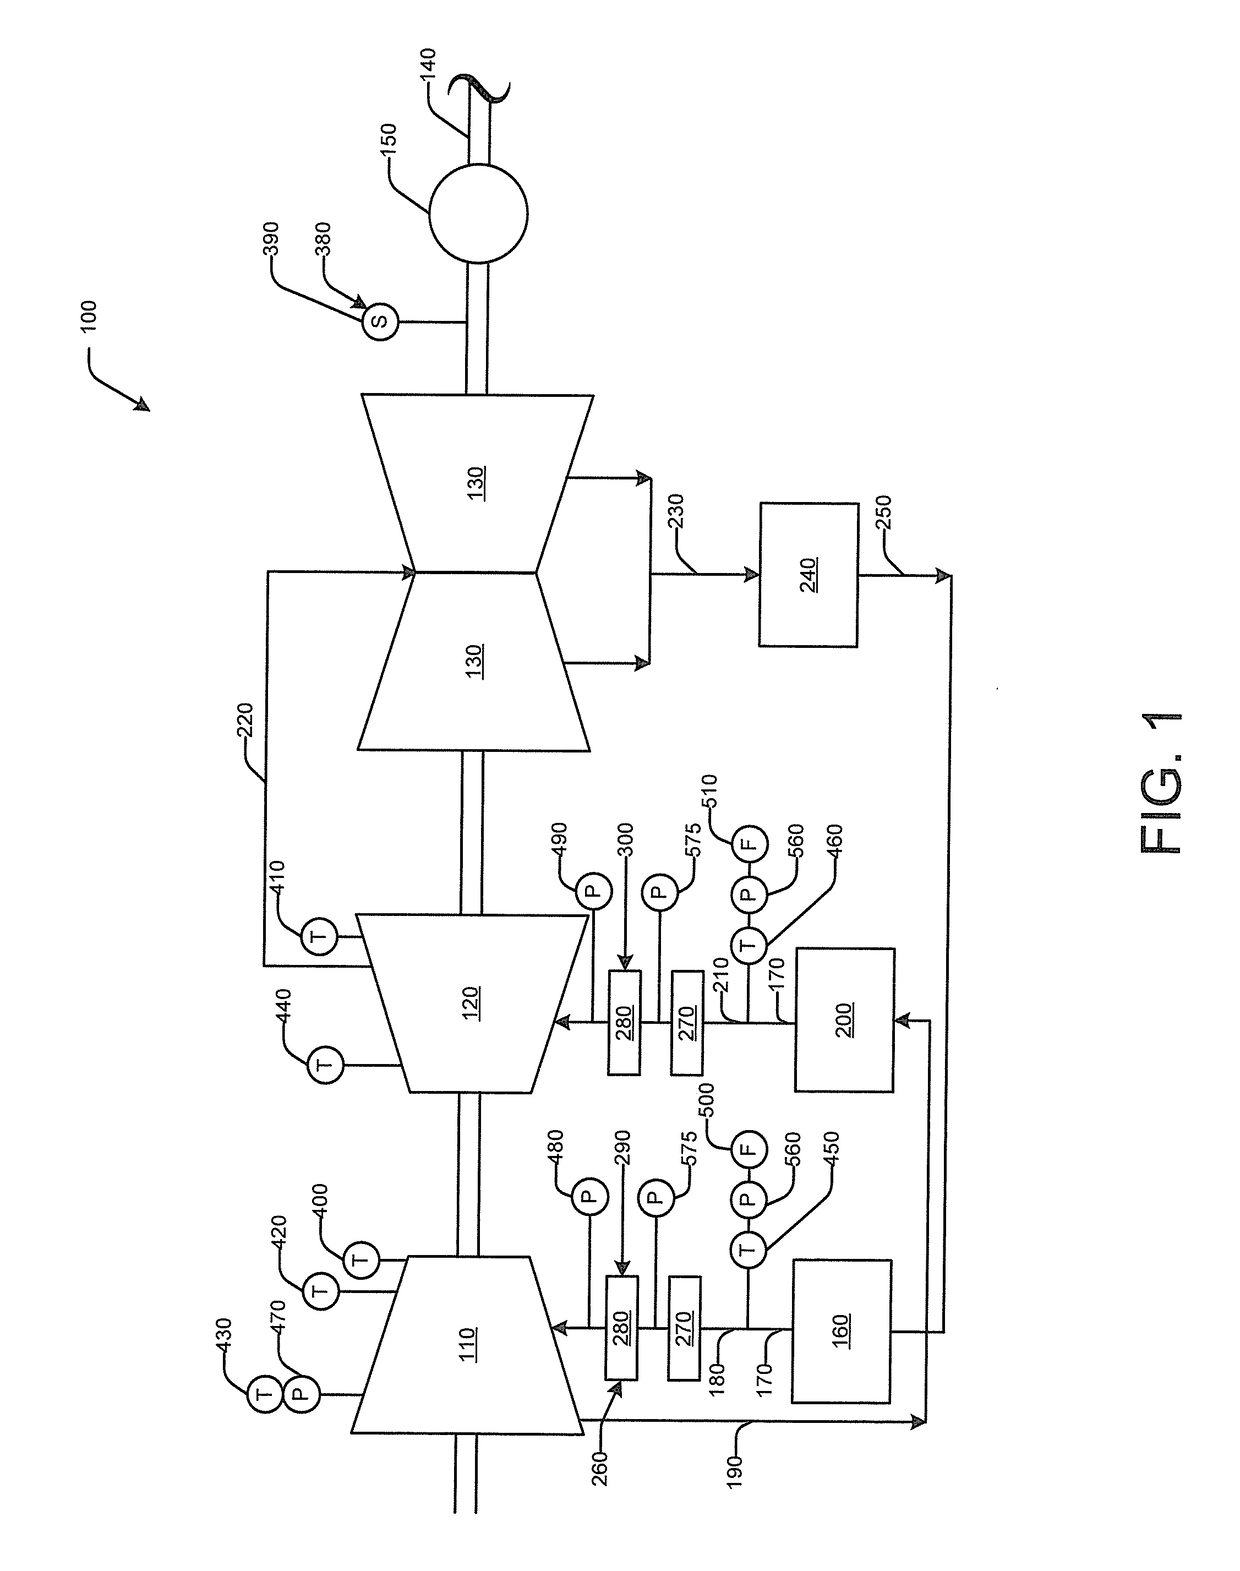 Solid particle erosion indicator module for a valve and actuator monitoring system